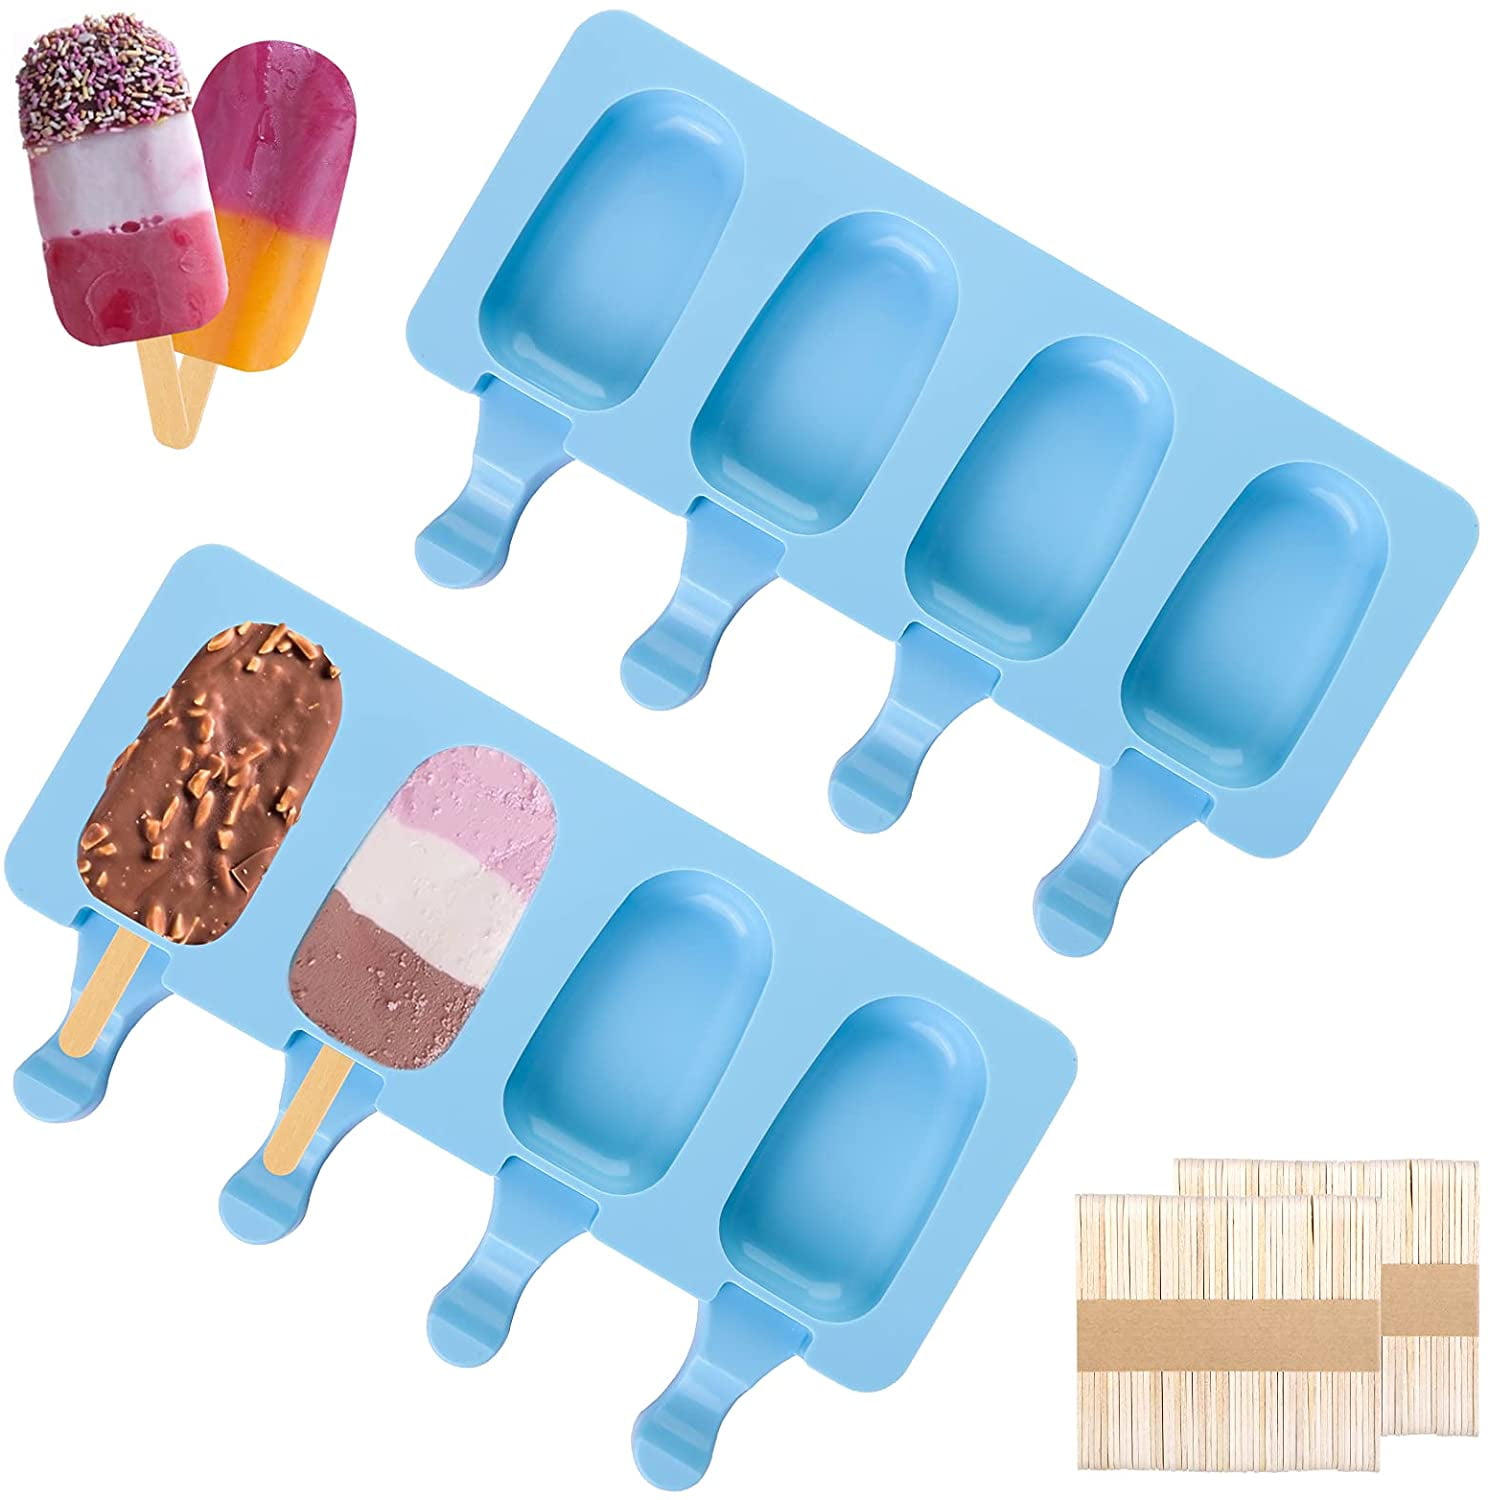 Yoghurt or Sweets Blue Ice Lolly Moulds Silicone 6 Ice Lolly Moulds Animal Mould Ice Lolly Moulds BPA Multifunctional Popsicle Mould for Children Baby Shapes for Frozen Fruit